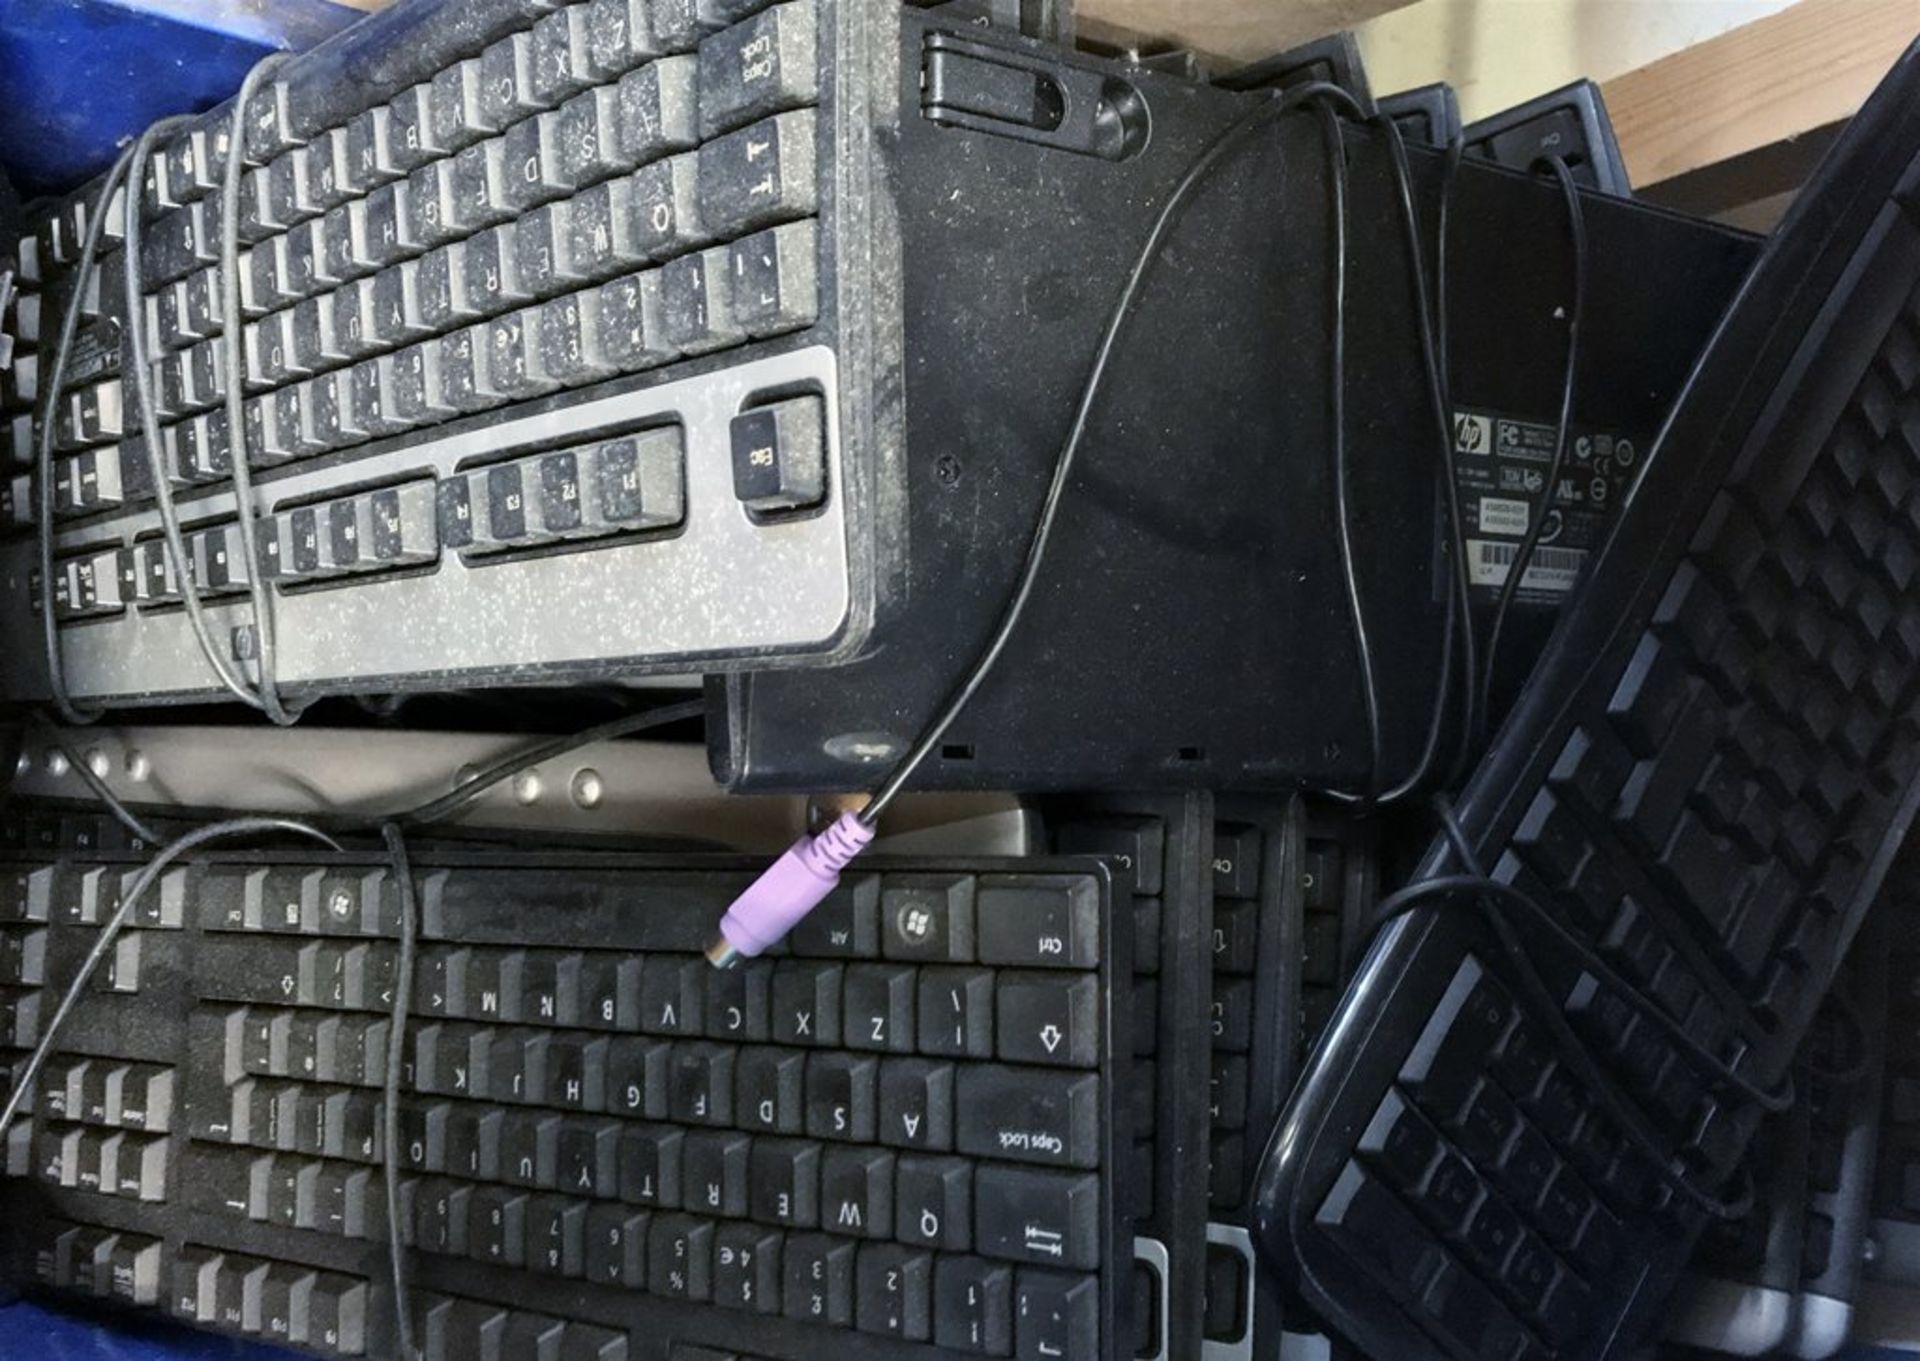 A Quantity of Approx 20-30 Computer Keyboards